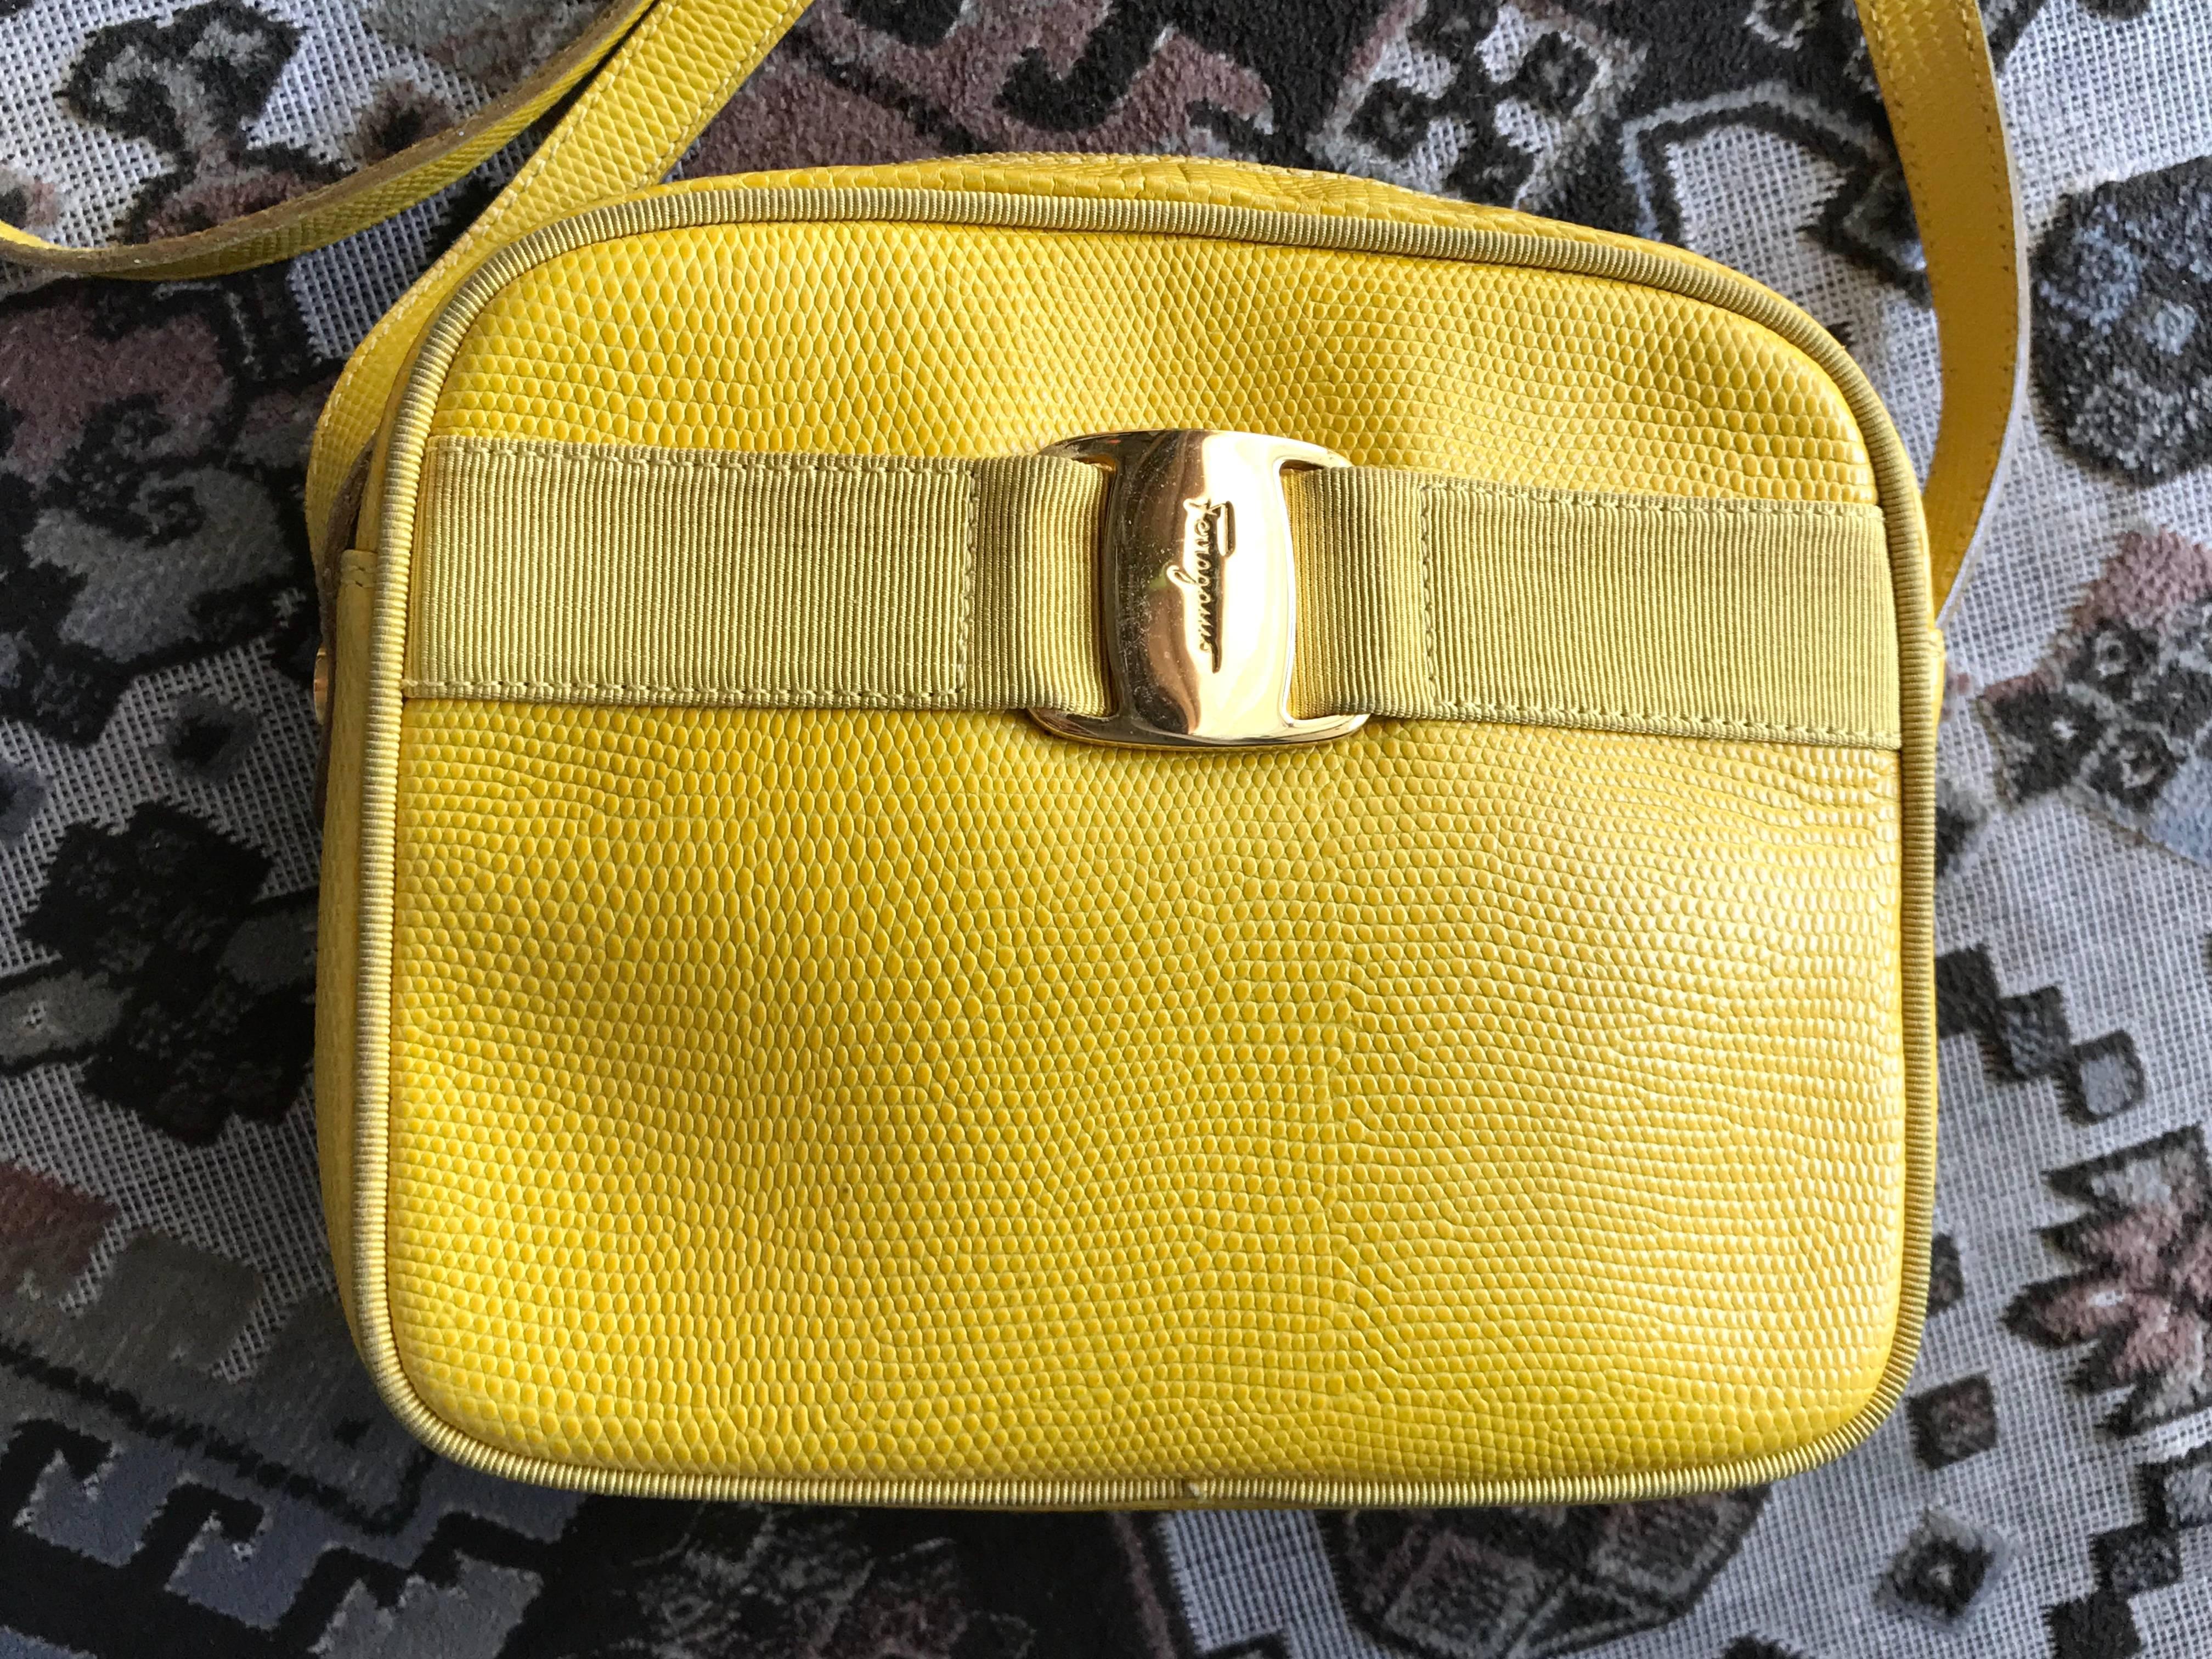 1990s. Vintage Salvatore Ferragamo lizard embossed yellow leather shoulder bag with golden logo embossed motif from vara collection. Rare color.

Vintage Salvatore Ferragamo lizard-embossed yellow leather shoulder bag from Vara collection back in